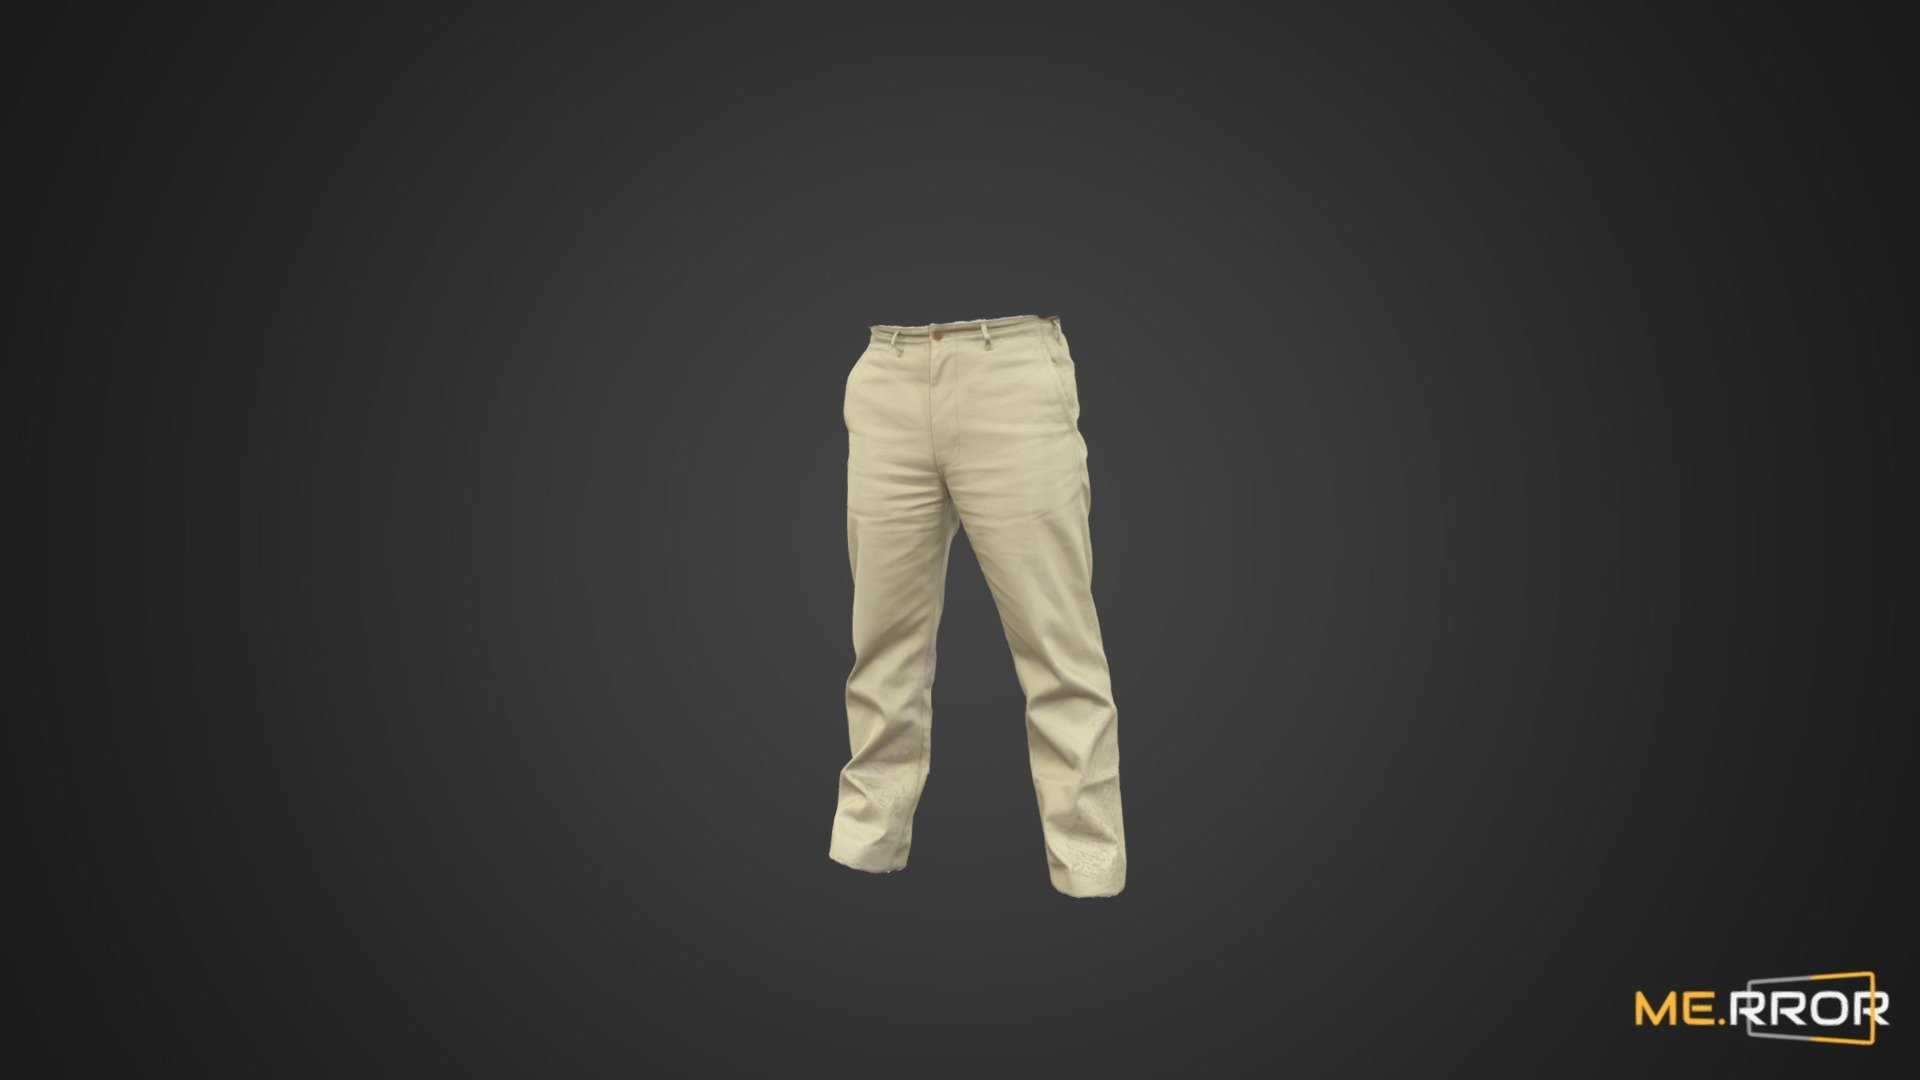 MERROR is a 3D Content PLATFORM which introduces various Asian assets to the 3D world


3DScanning #Photogrametry #ME.RROR - Beige Pants - Buy Royalty Free 3D model by ME.RROR Studio (@merror) 3d model